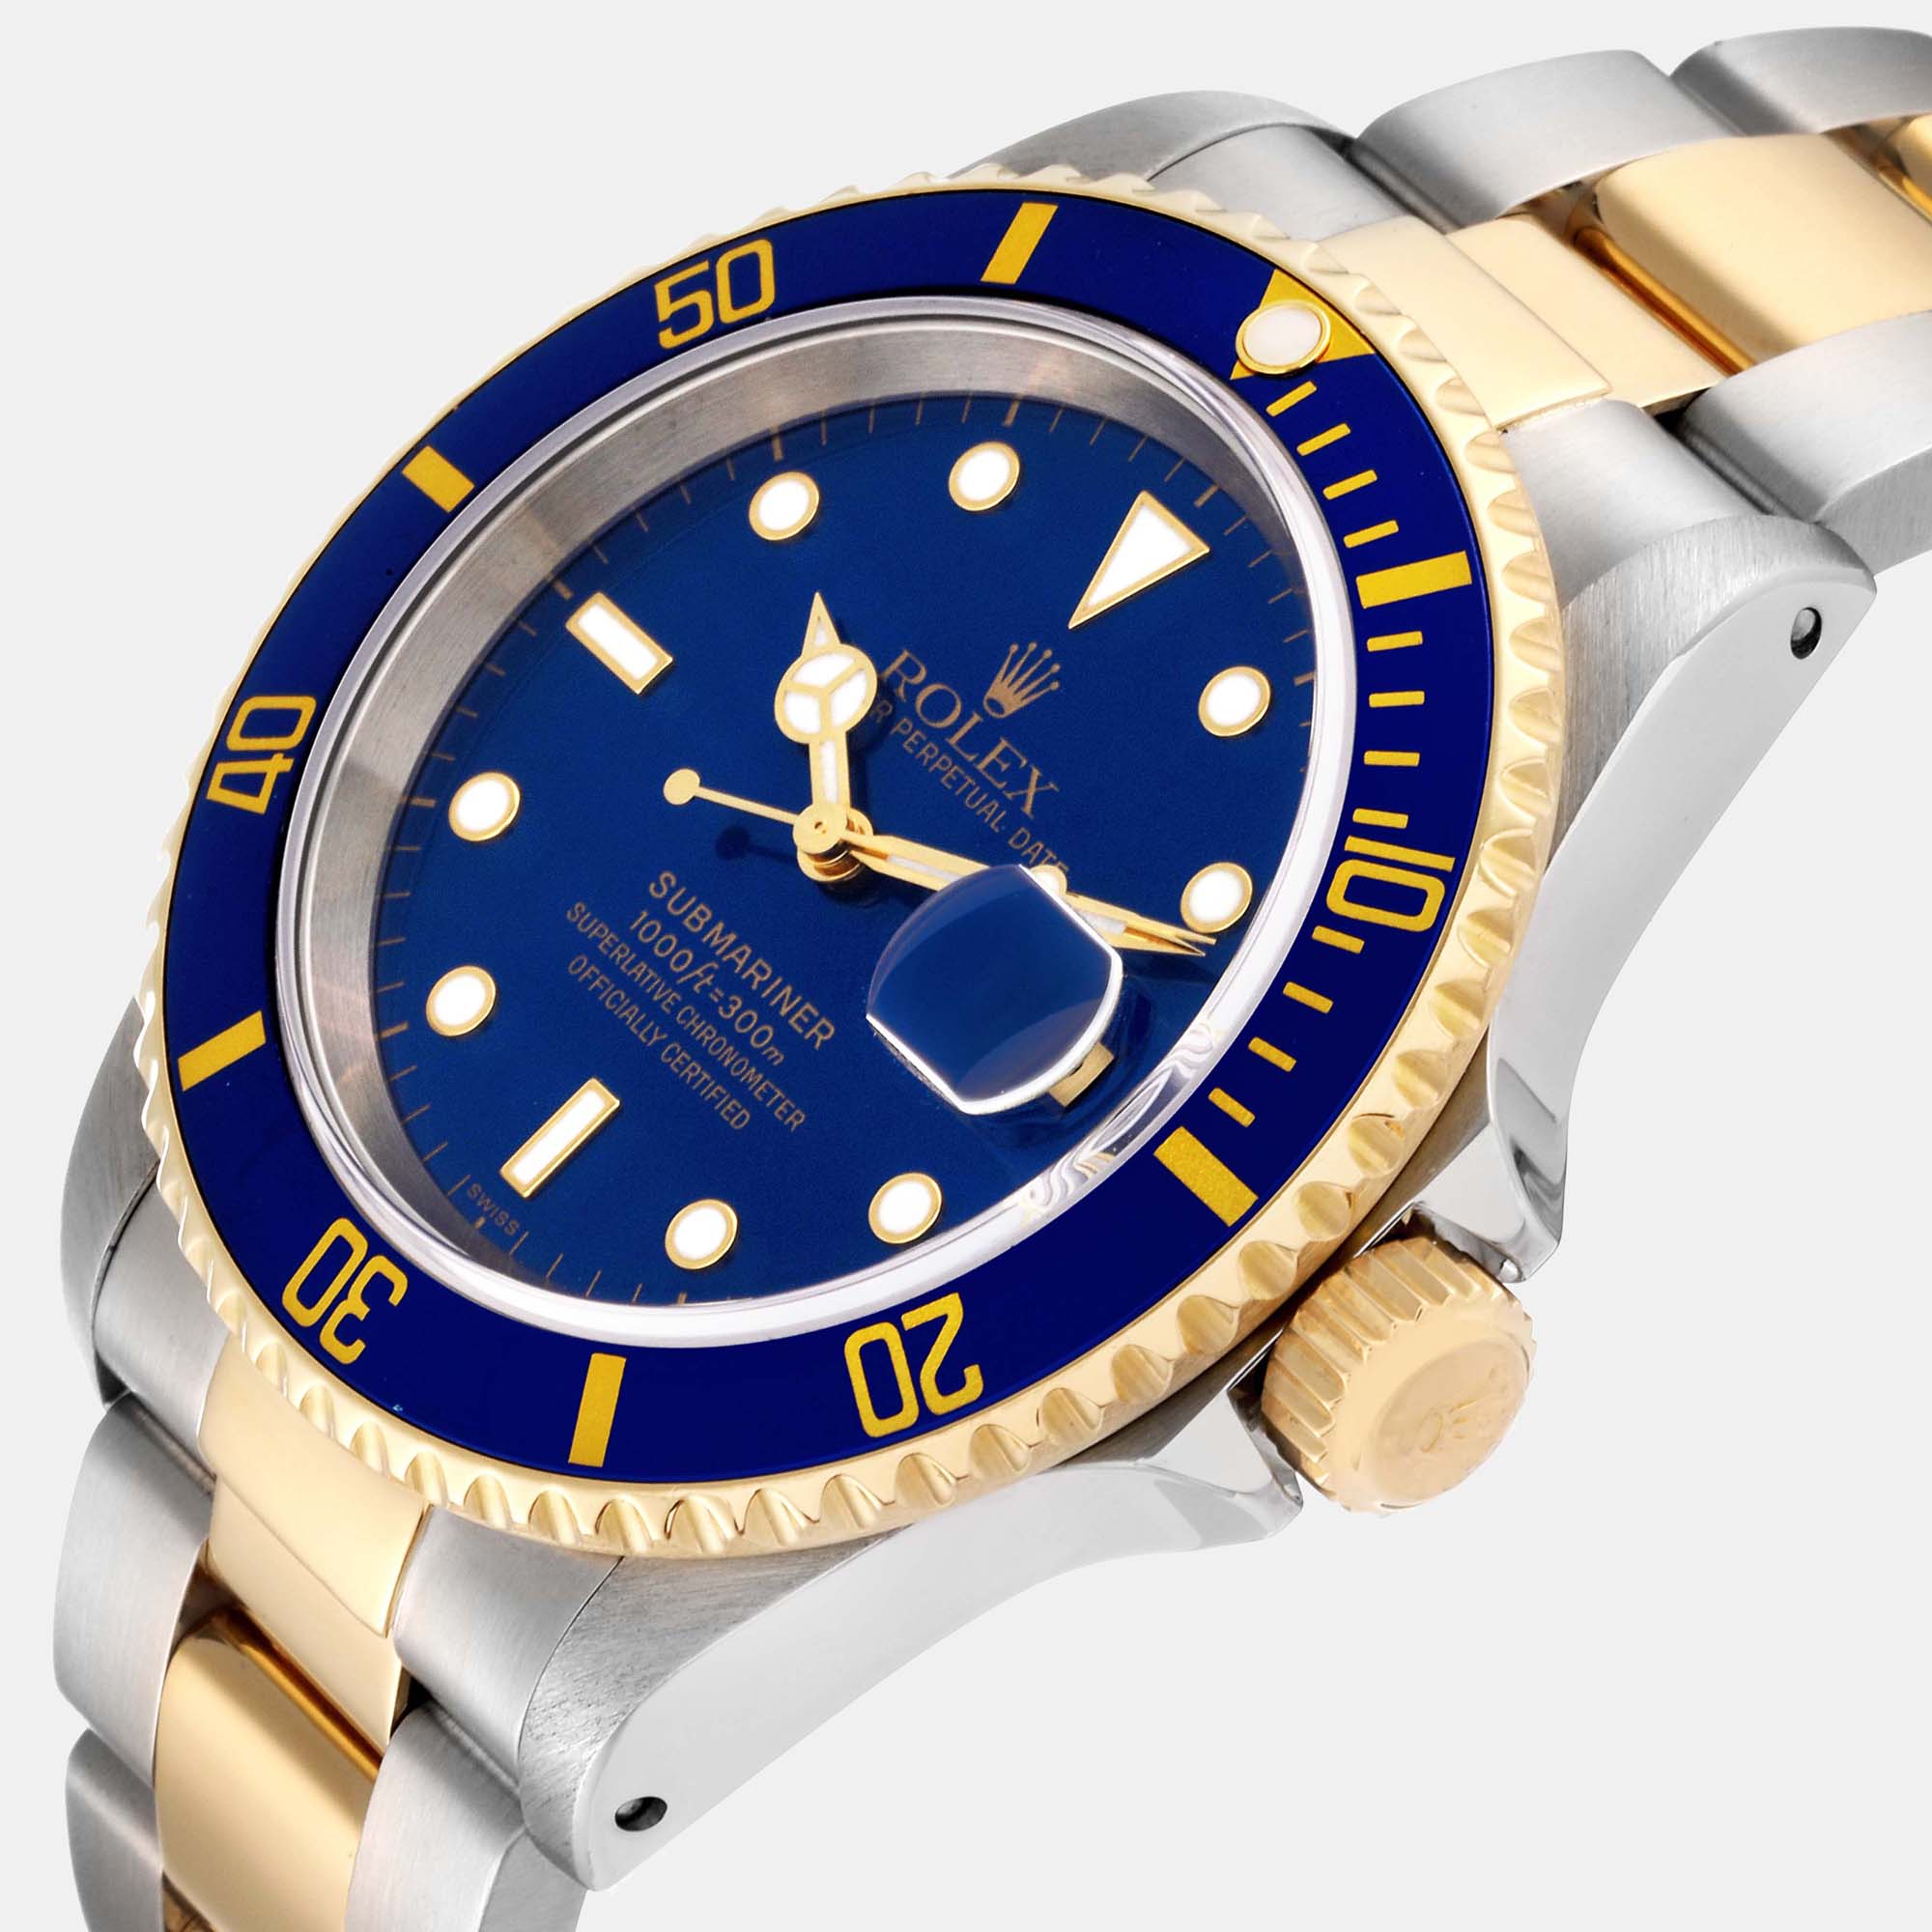 

Rolex Blue 18K Yellow Gold And Stainless Steel Submariner 16613 Men's Wristwatch 40 mm